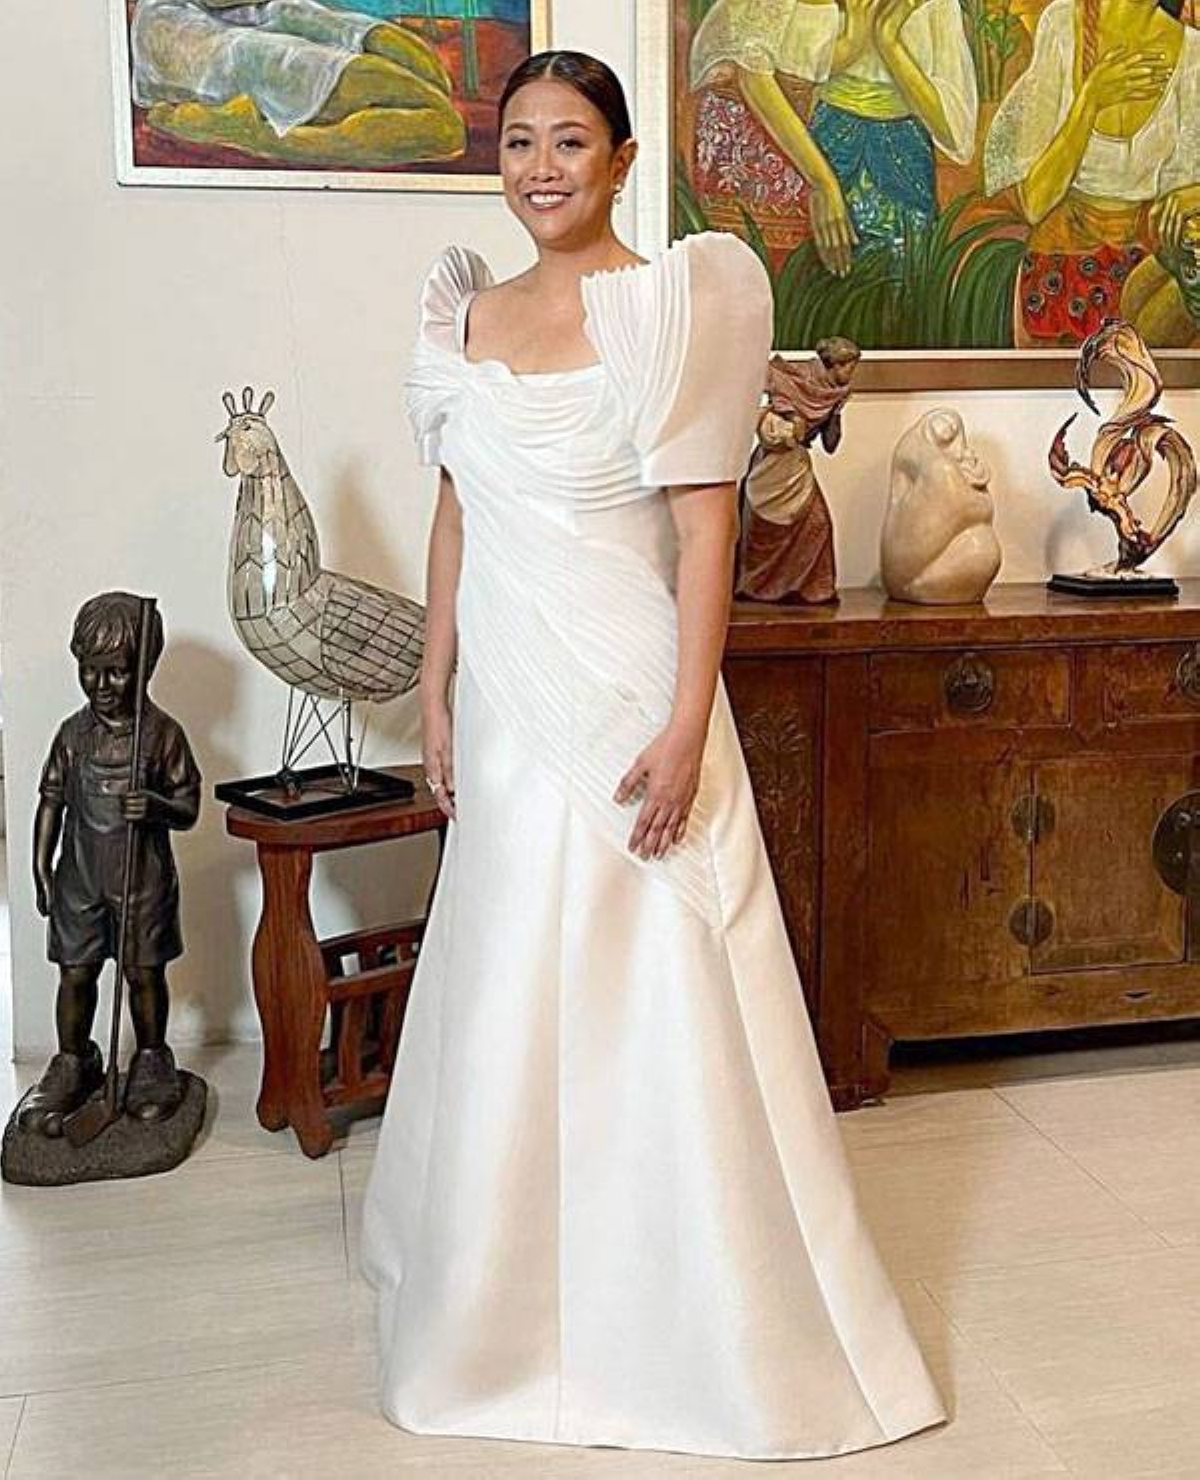 NANCY BINAY Nancy’s got it again! Congratulations are in order anew for the ever receptive and fabulously unflappable Senator Nancy Binay whose modern white Michael Leyva Filipiniana gown with sheer organza details displaces once and for all that once unforgettable hot air balloon mishap. Binay has never had a fashion faux pax since, and in the last several SONAs, has clinched the stylishly dignified look that befits a woman of her stature. INSTAGRAM PHOTO/MICHAELLEYVA